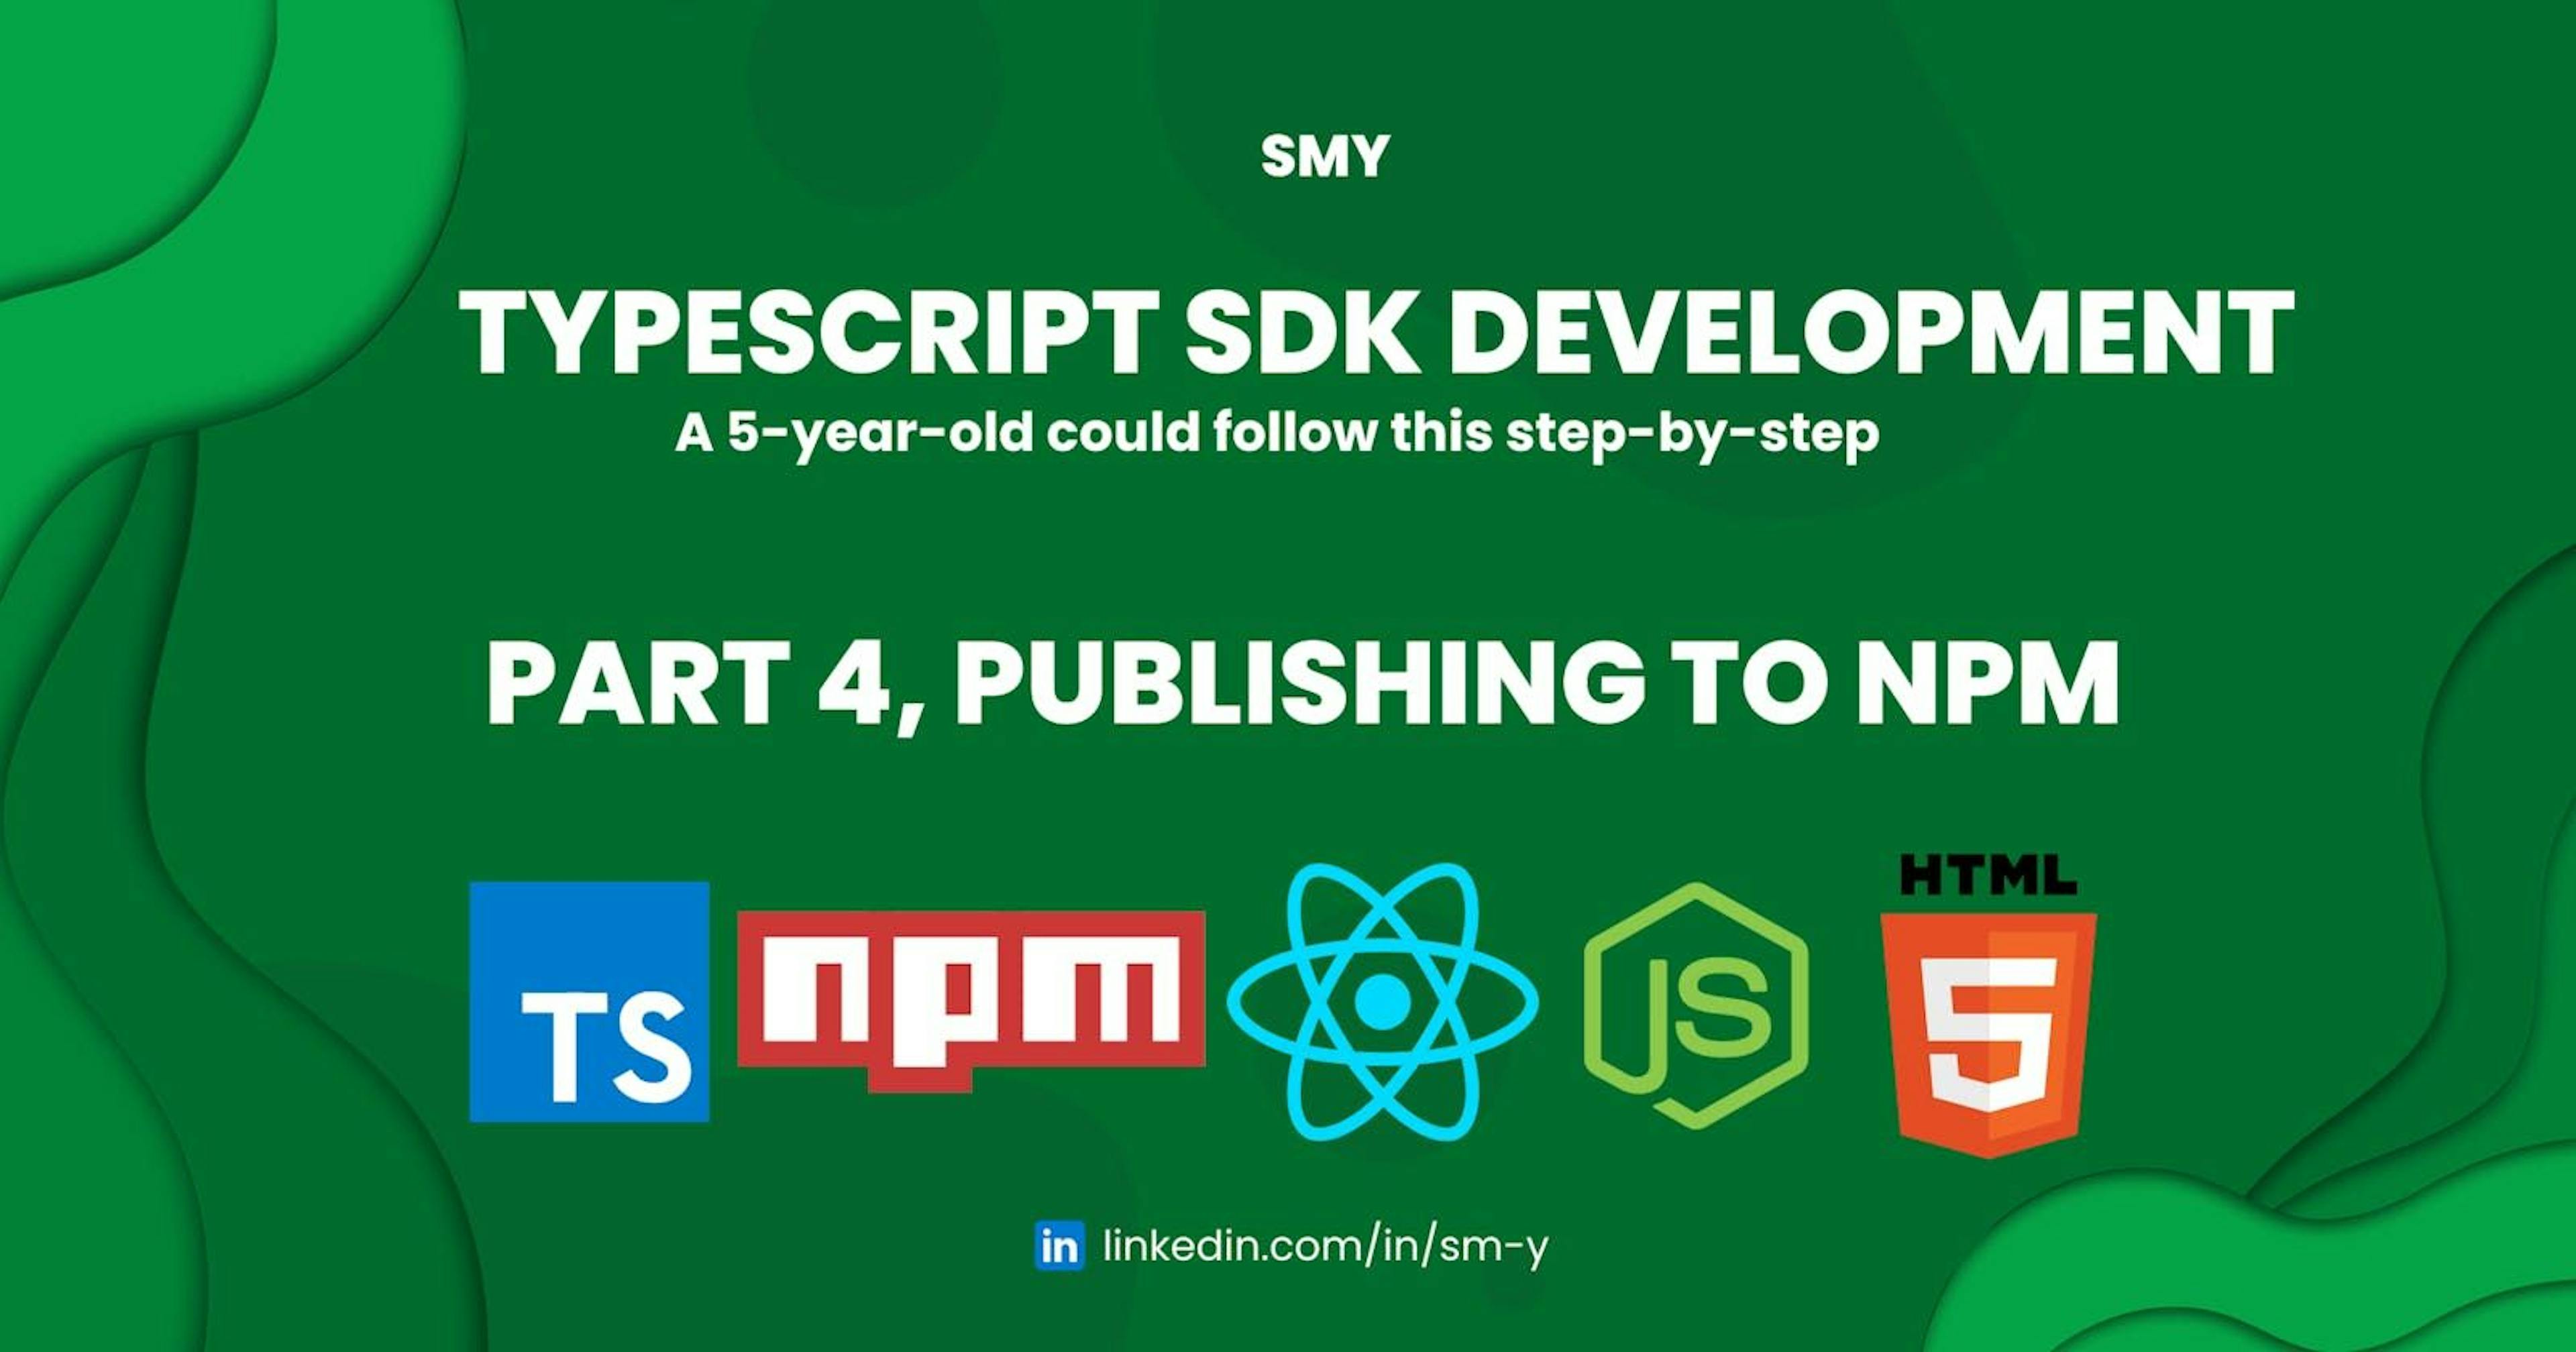 /a-5-year-old-could-follow-this-typescript-sdk-development-guide-part-4-publishing-to-npm feature image